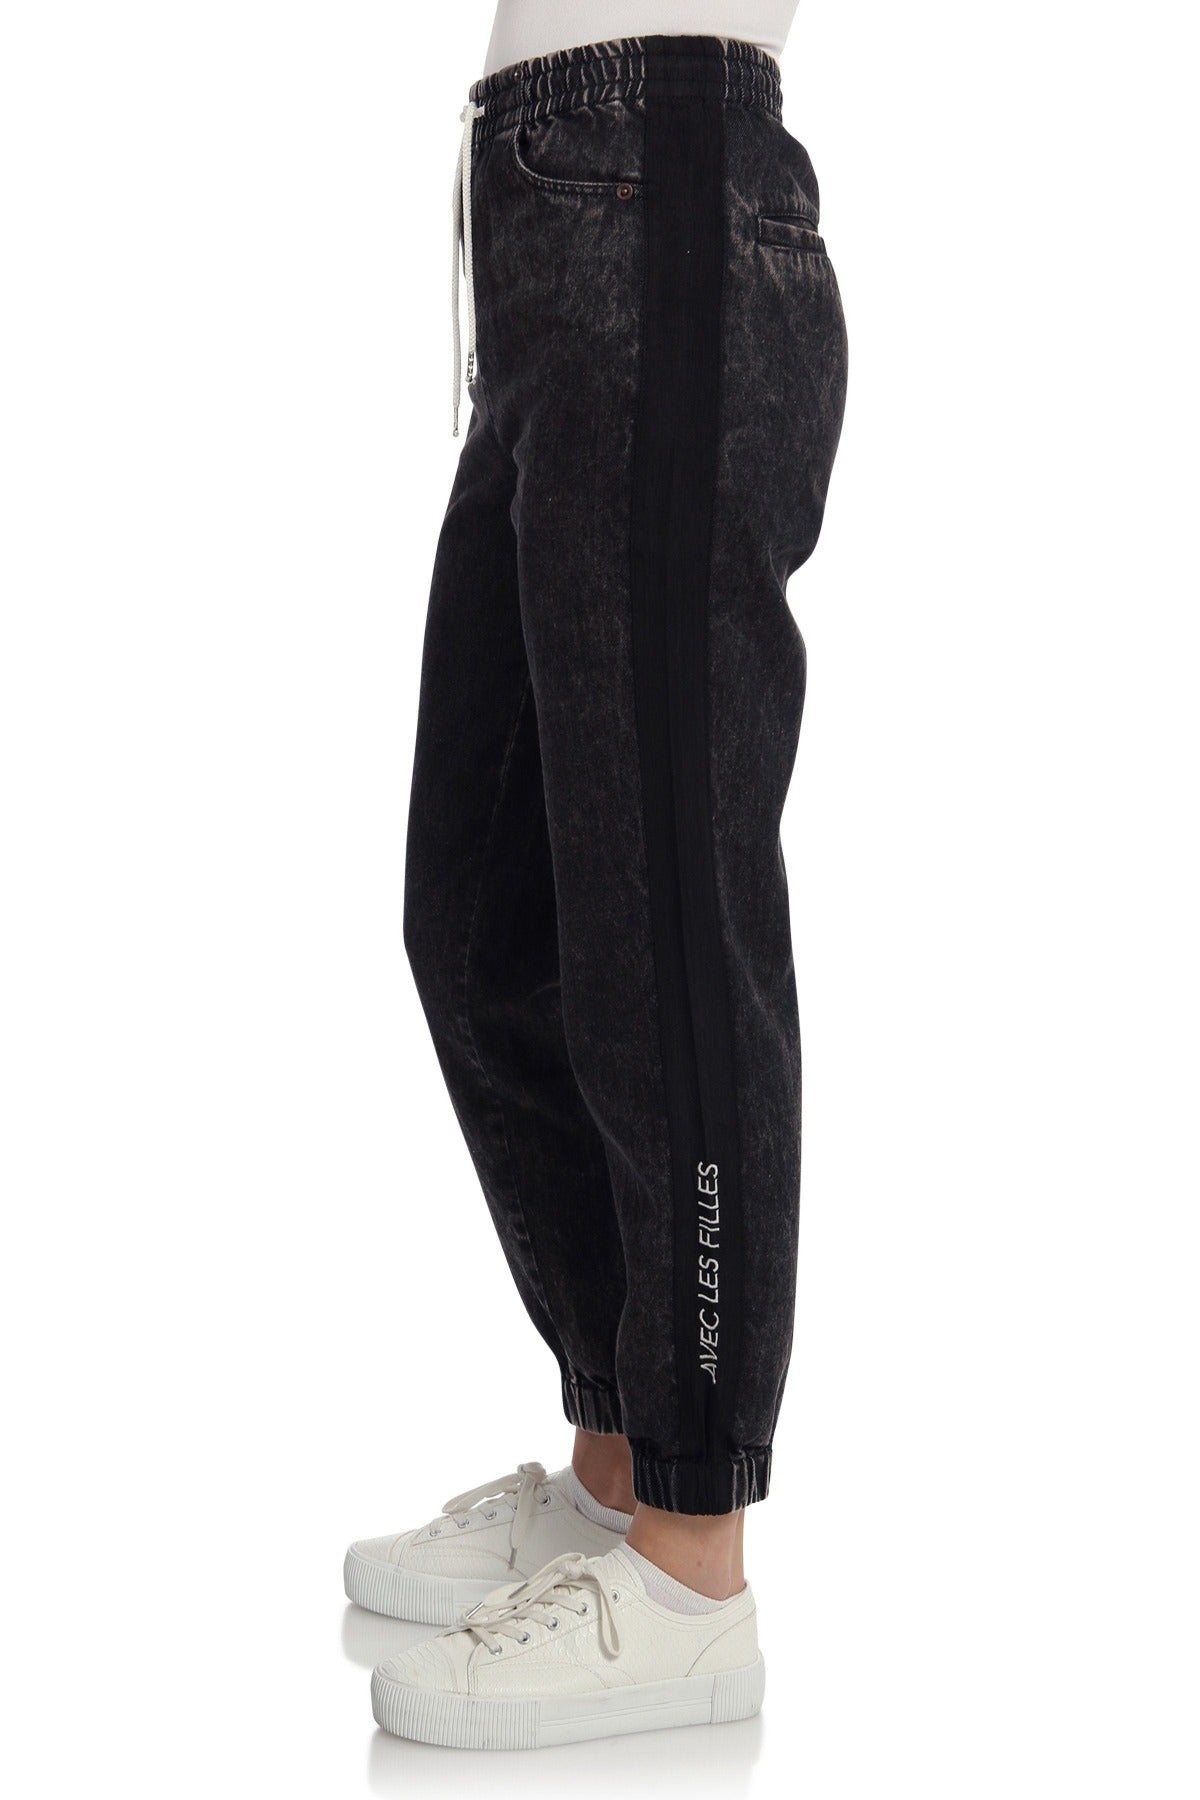 Washed Denim Joggers Cloudy Black - Women's Pull-On Fashion Pants 